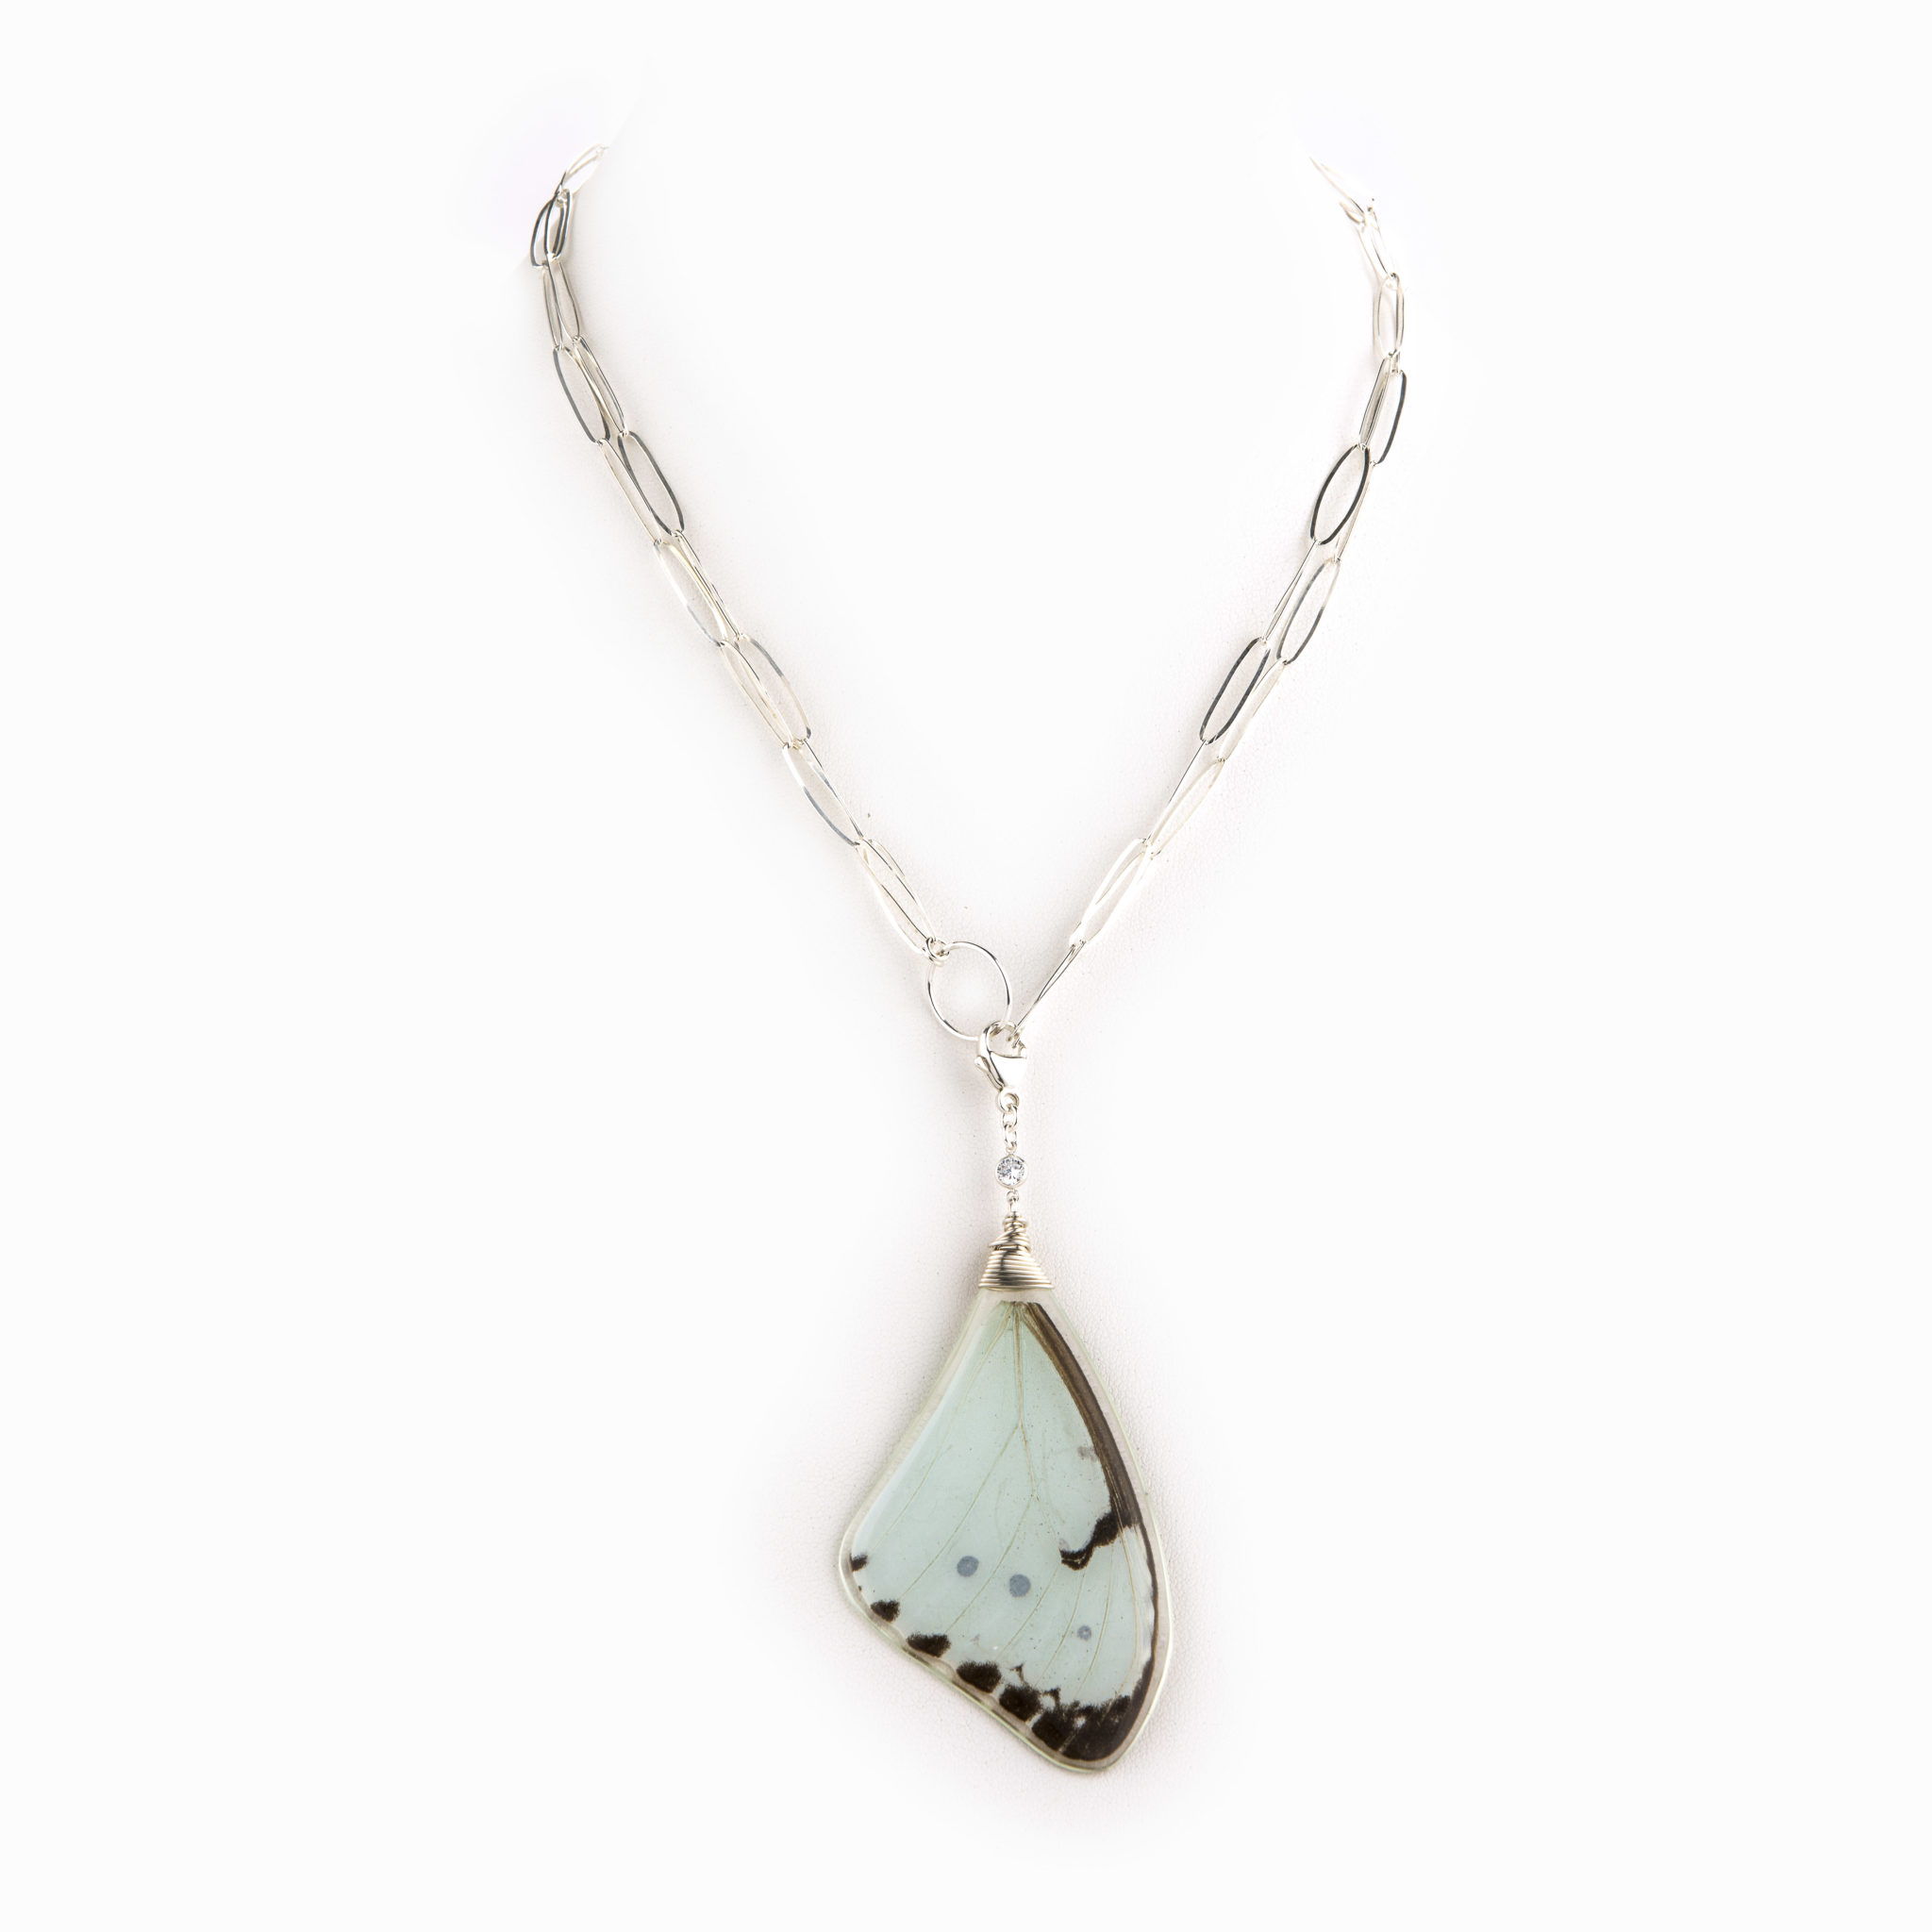 Featured image for “Pastel Butterfly Wing Necklace”